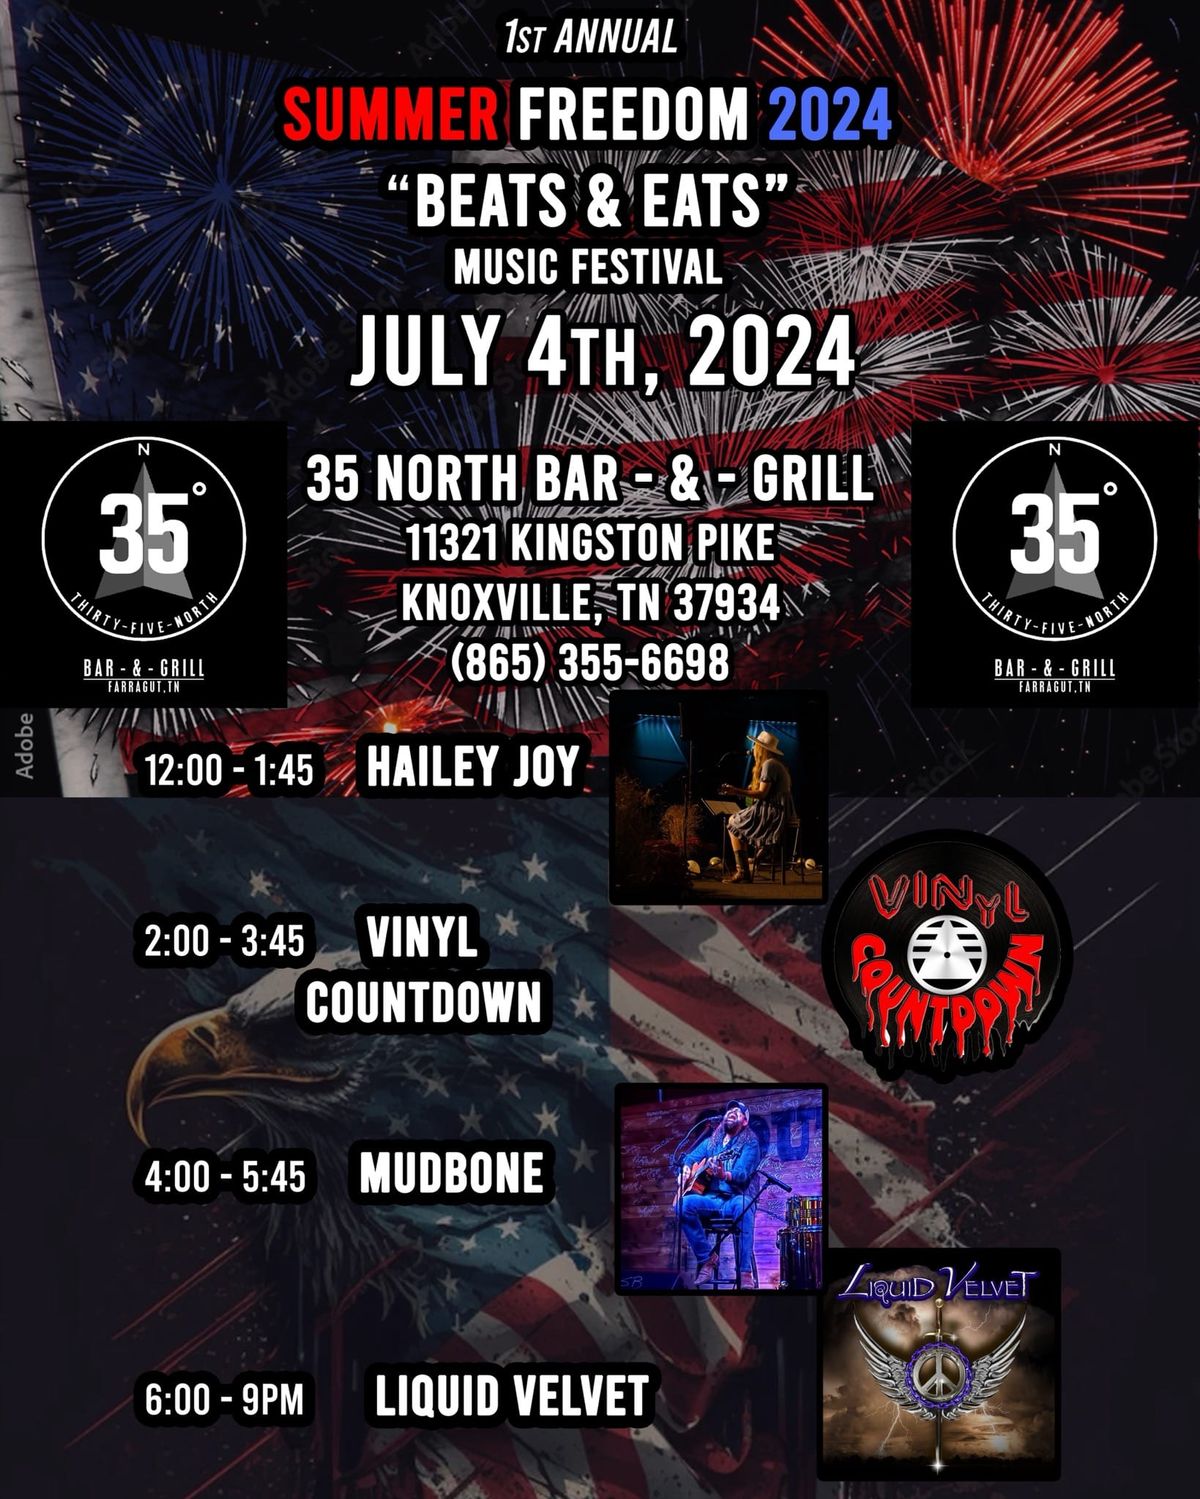 Vinyl Countdown @35 North - 4th of July Festival